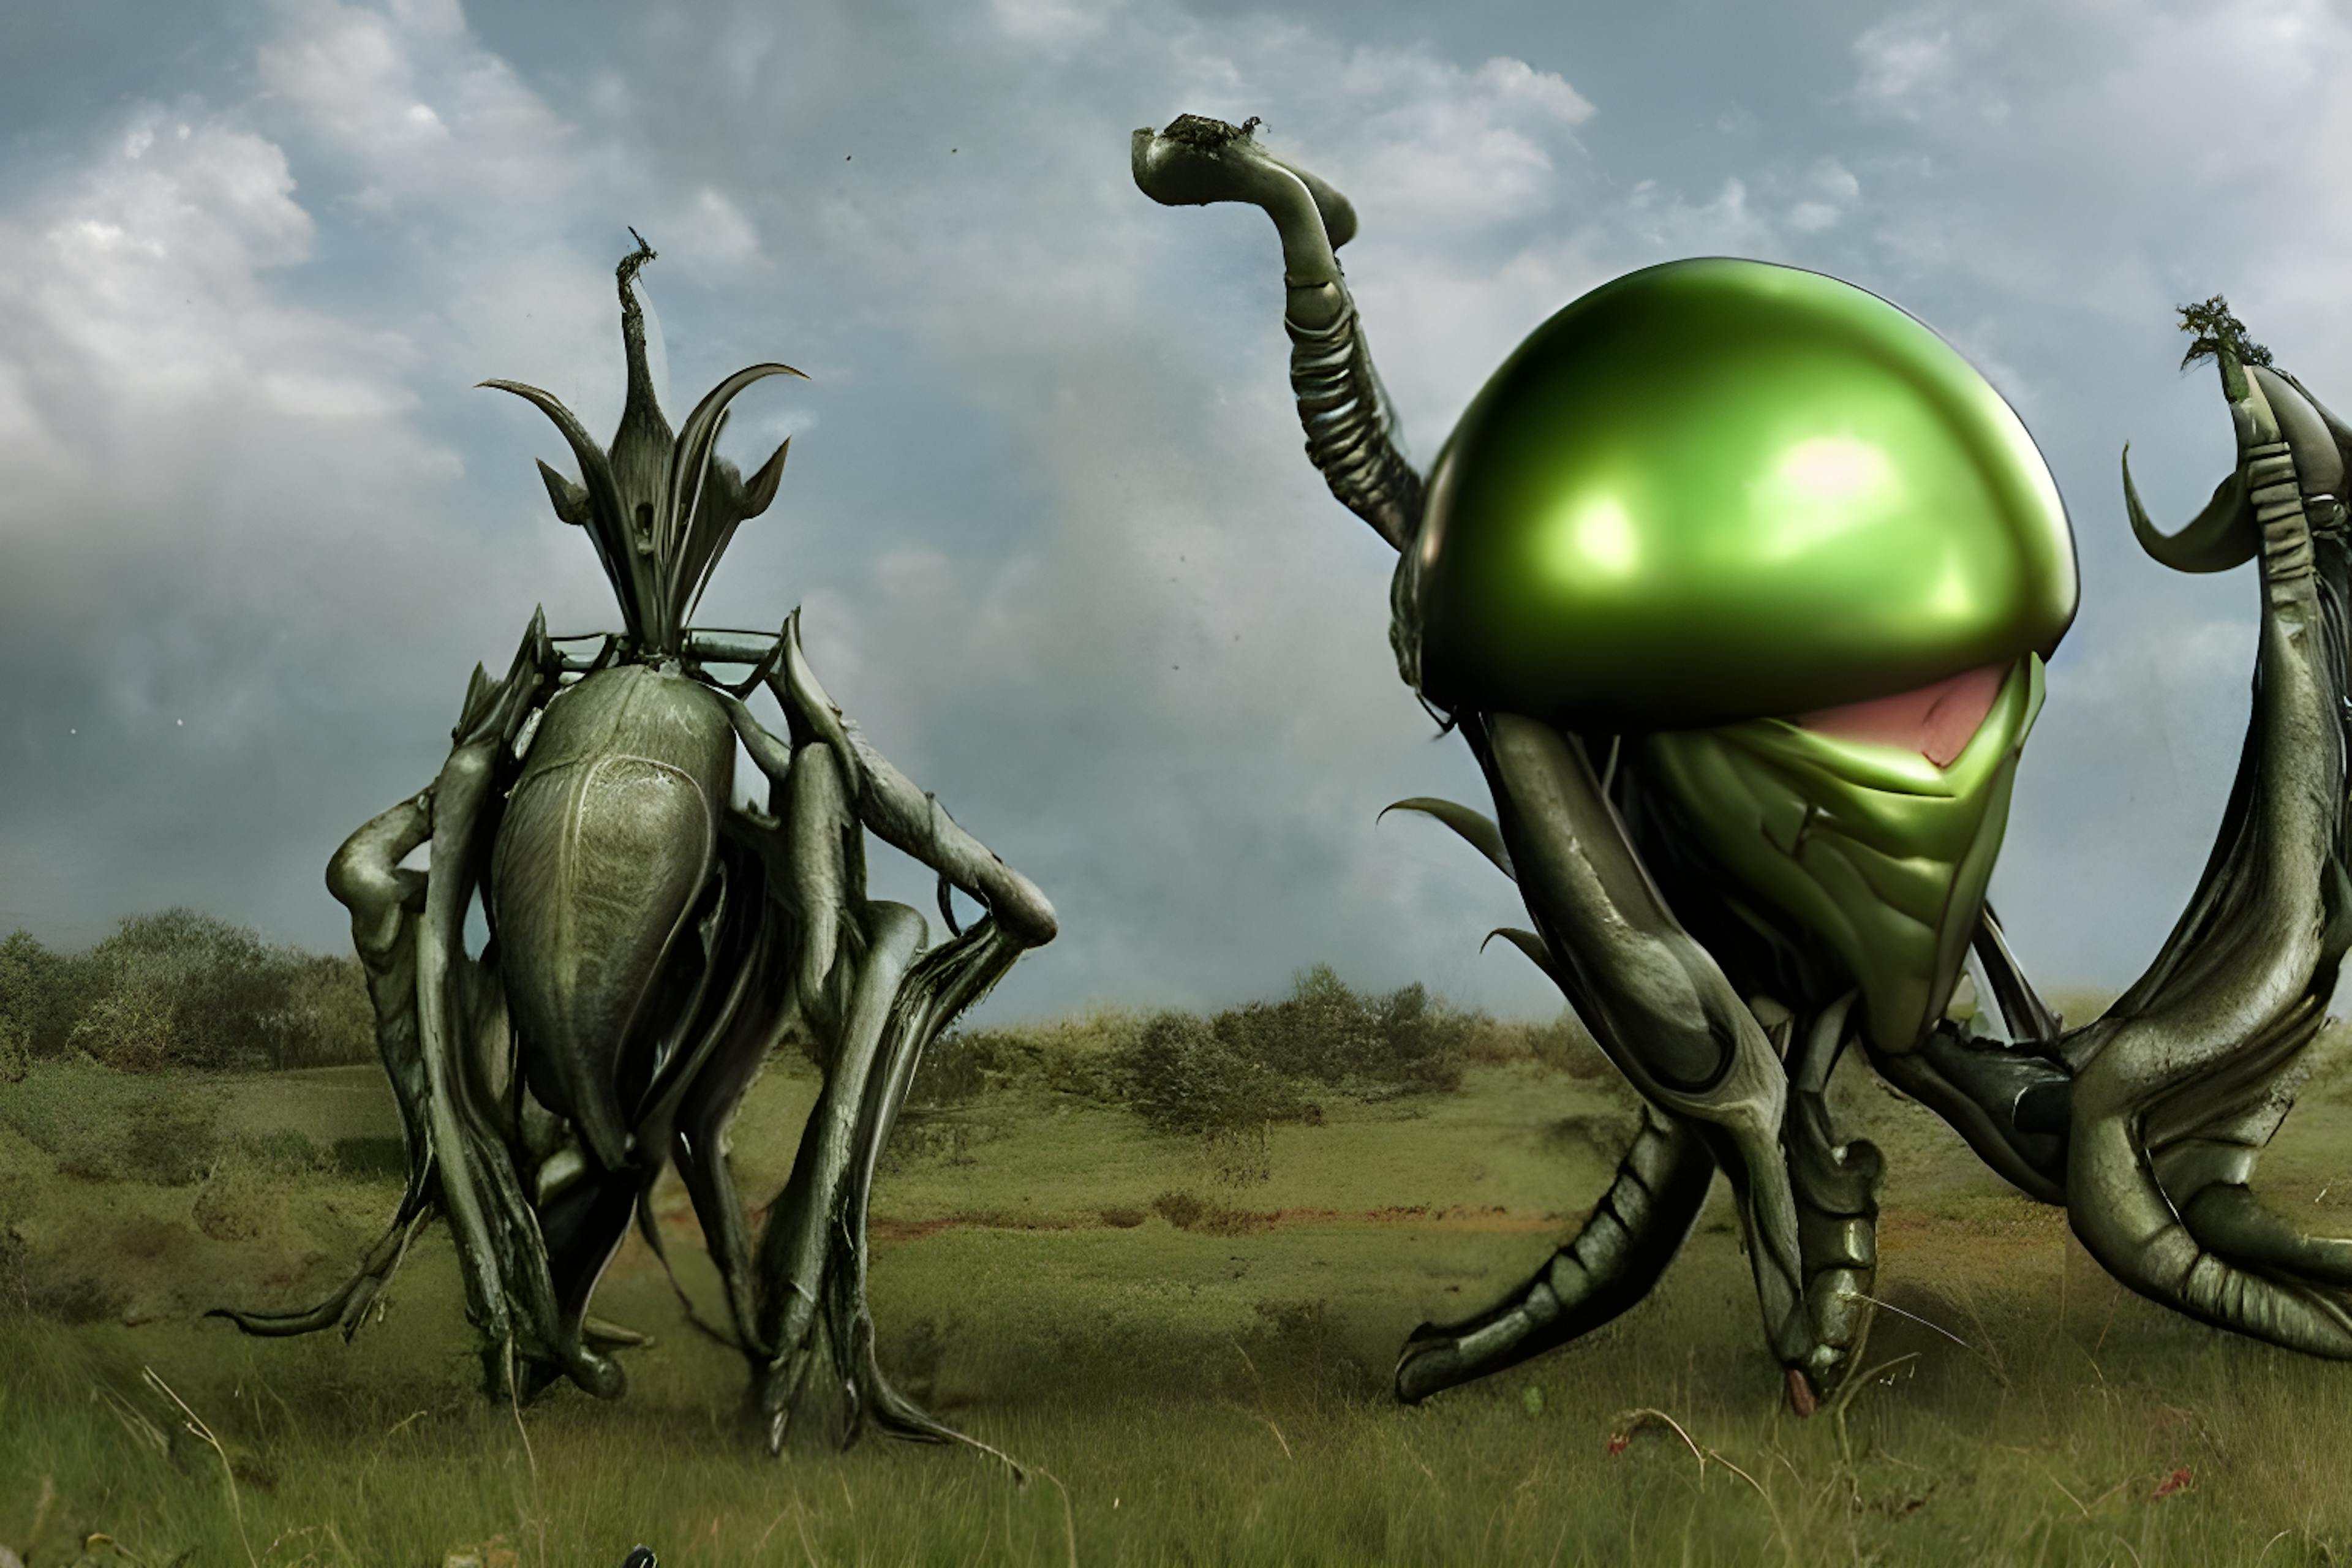 upscaled giant insectoid aliens!